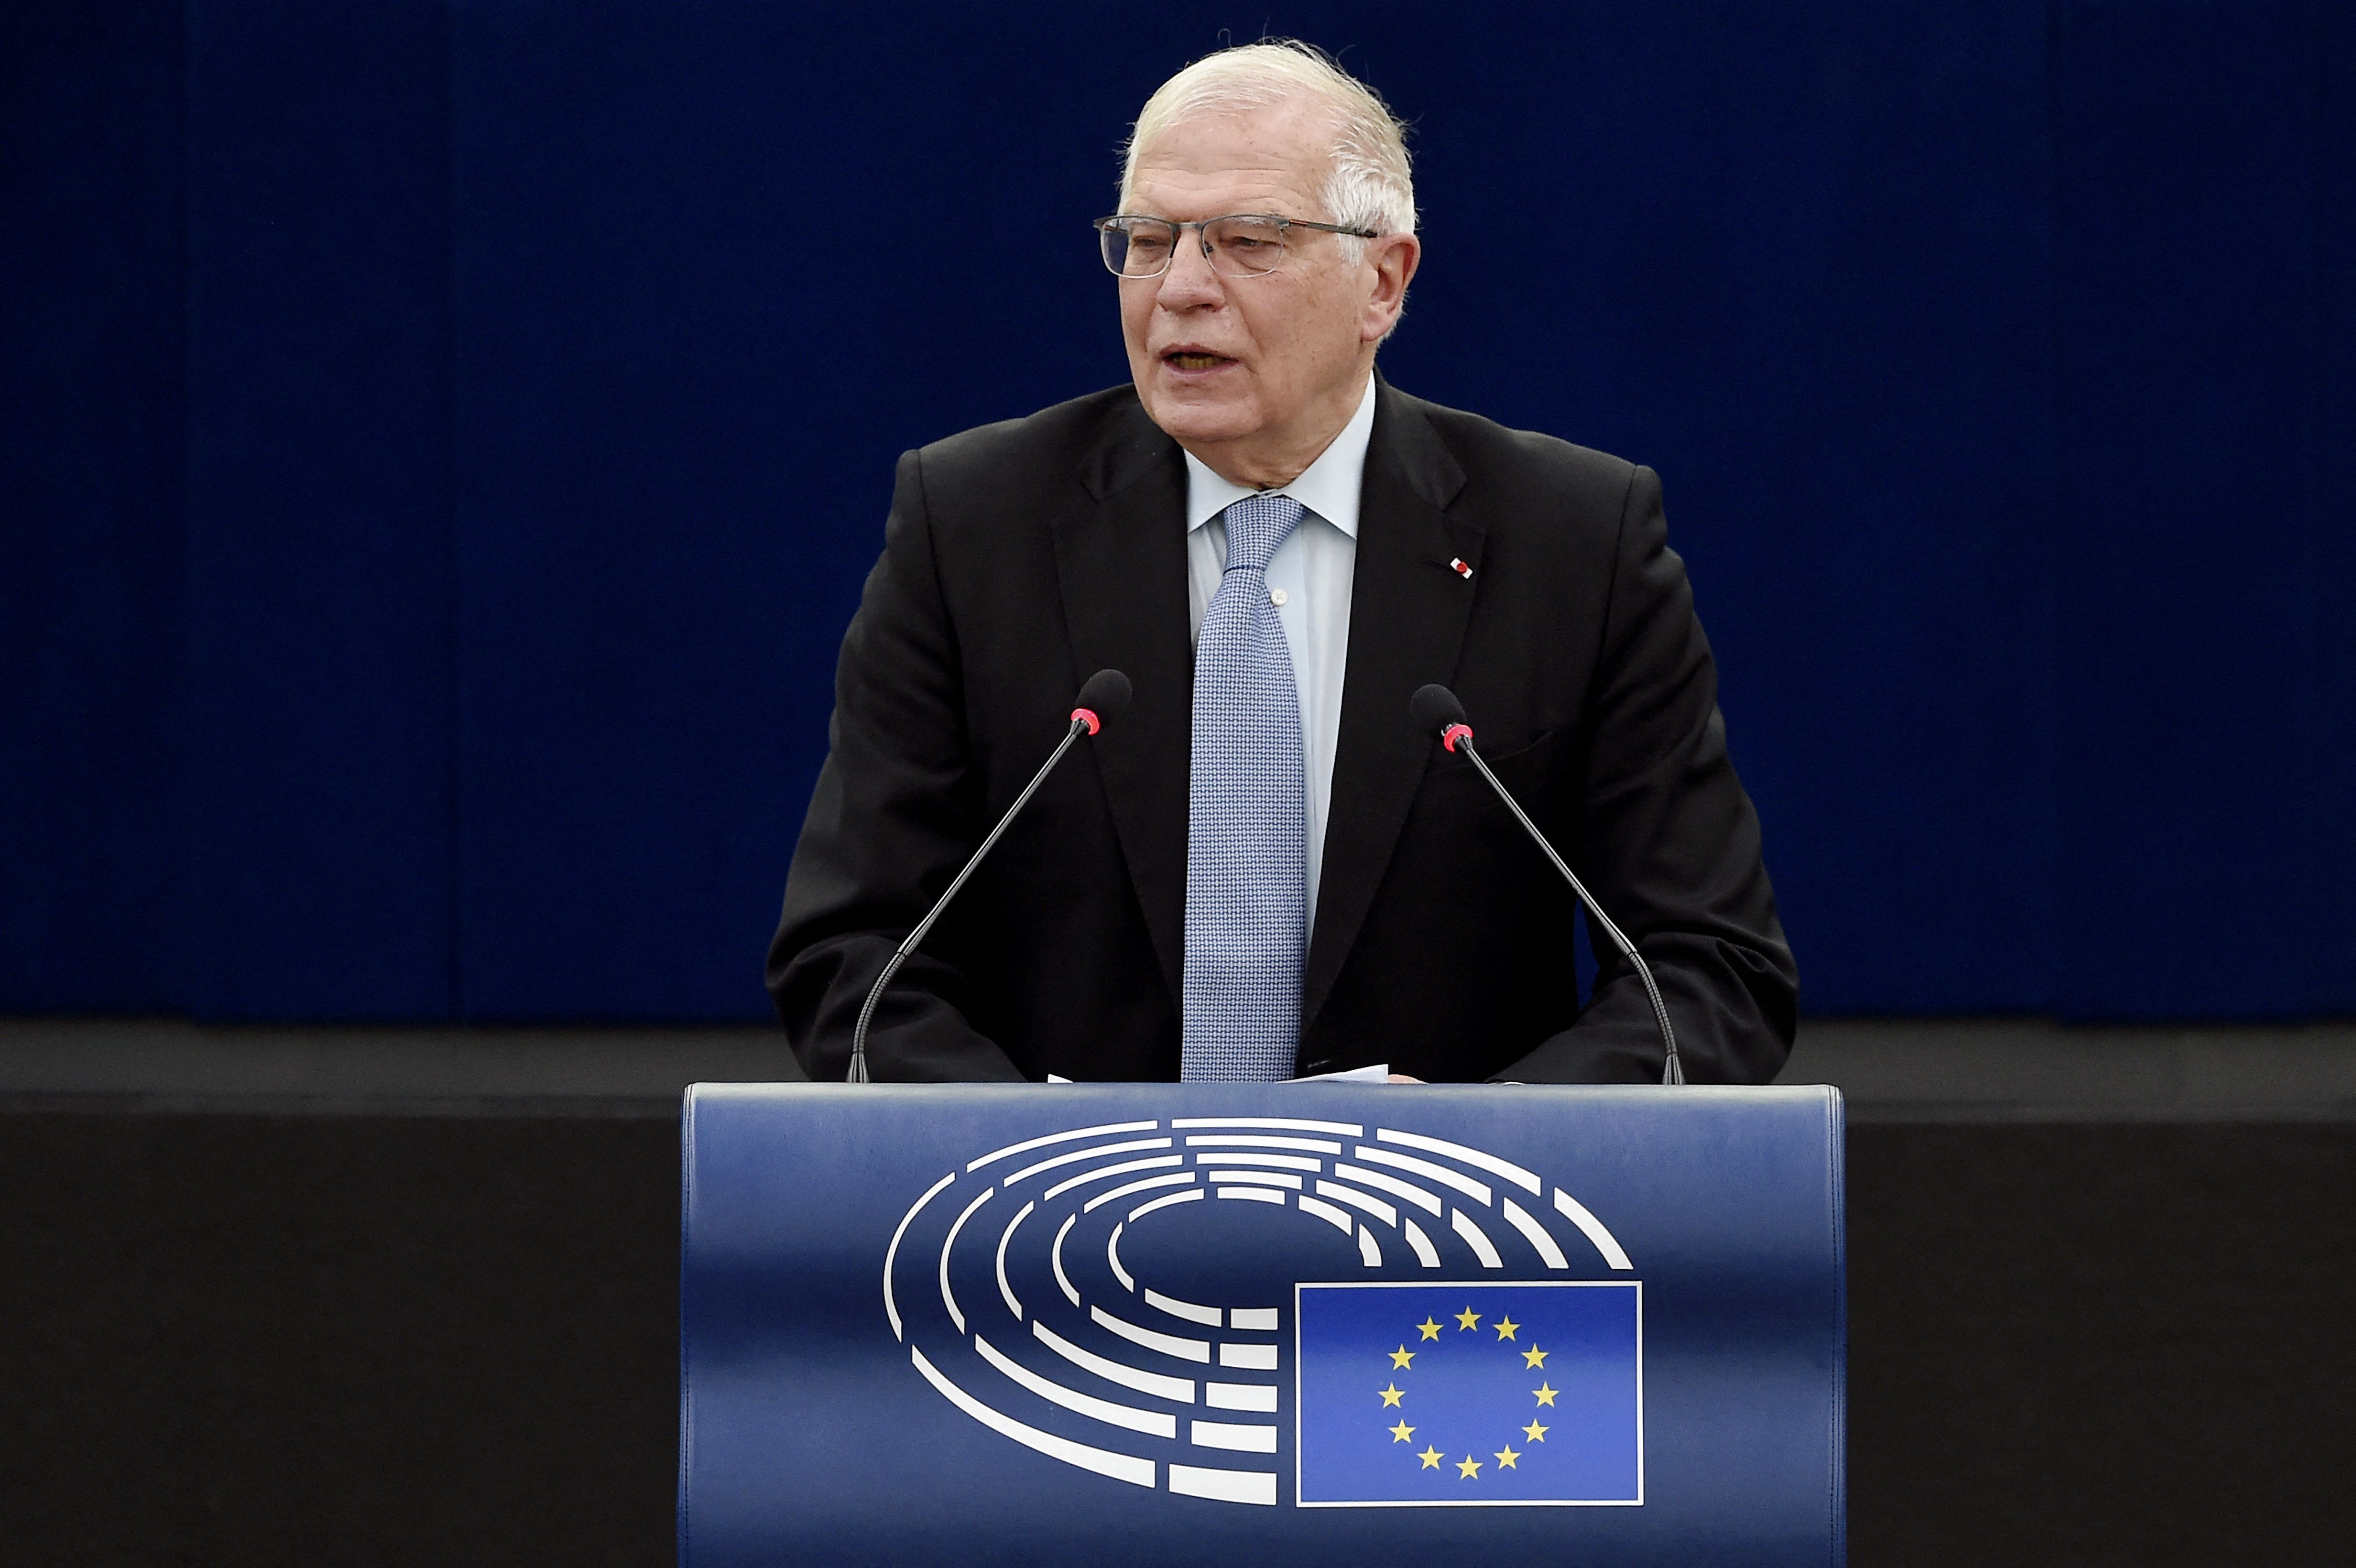 Josep Borrell speaks in a debate on European security and the Russian military threat against Ukraine during a plenary session at the European Parliament in Strasbourg on February 16.